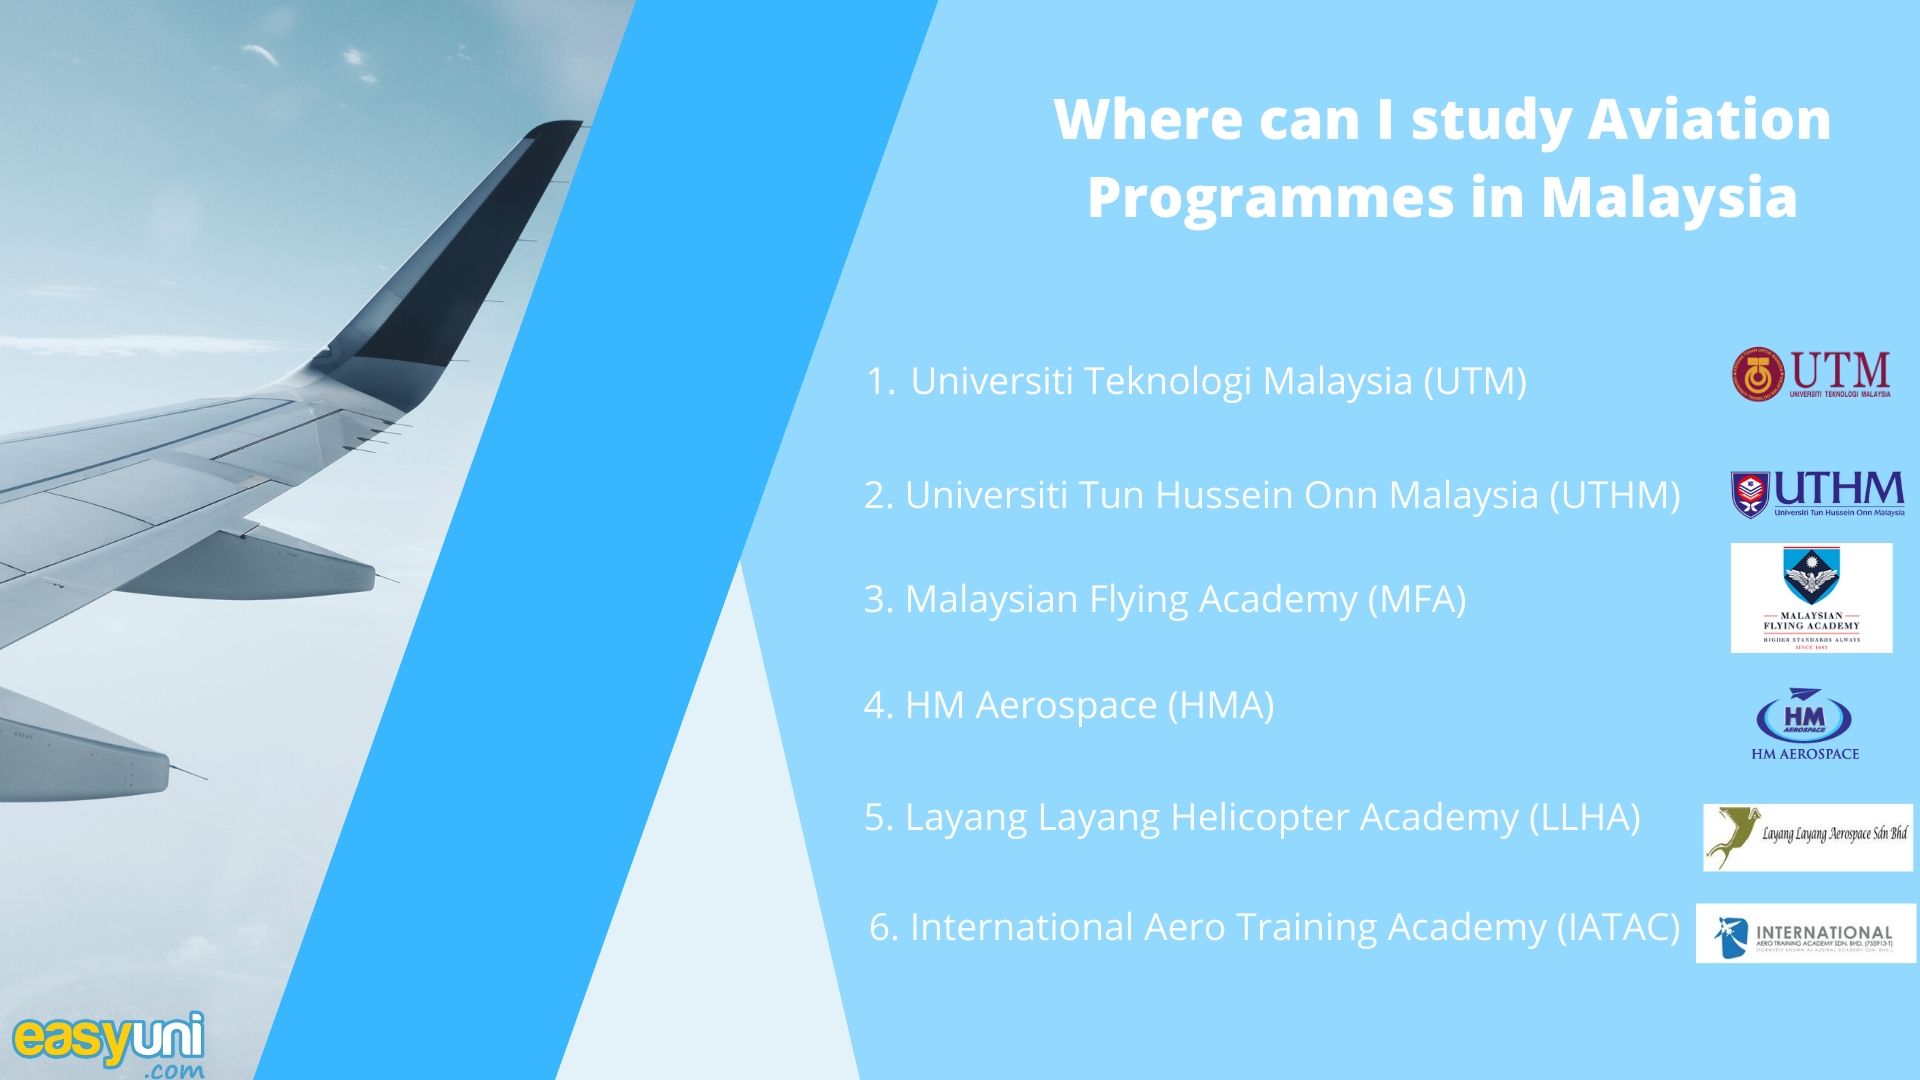 Where can I study Aviation Programmes in Malaysia